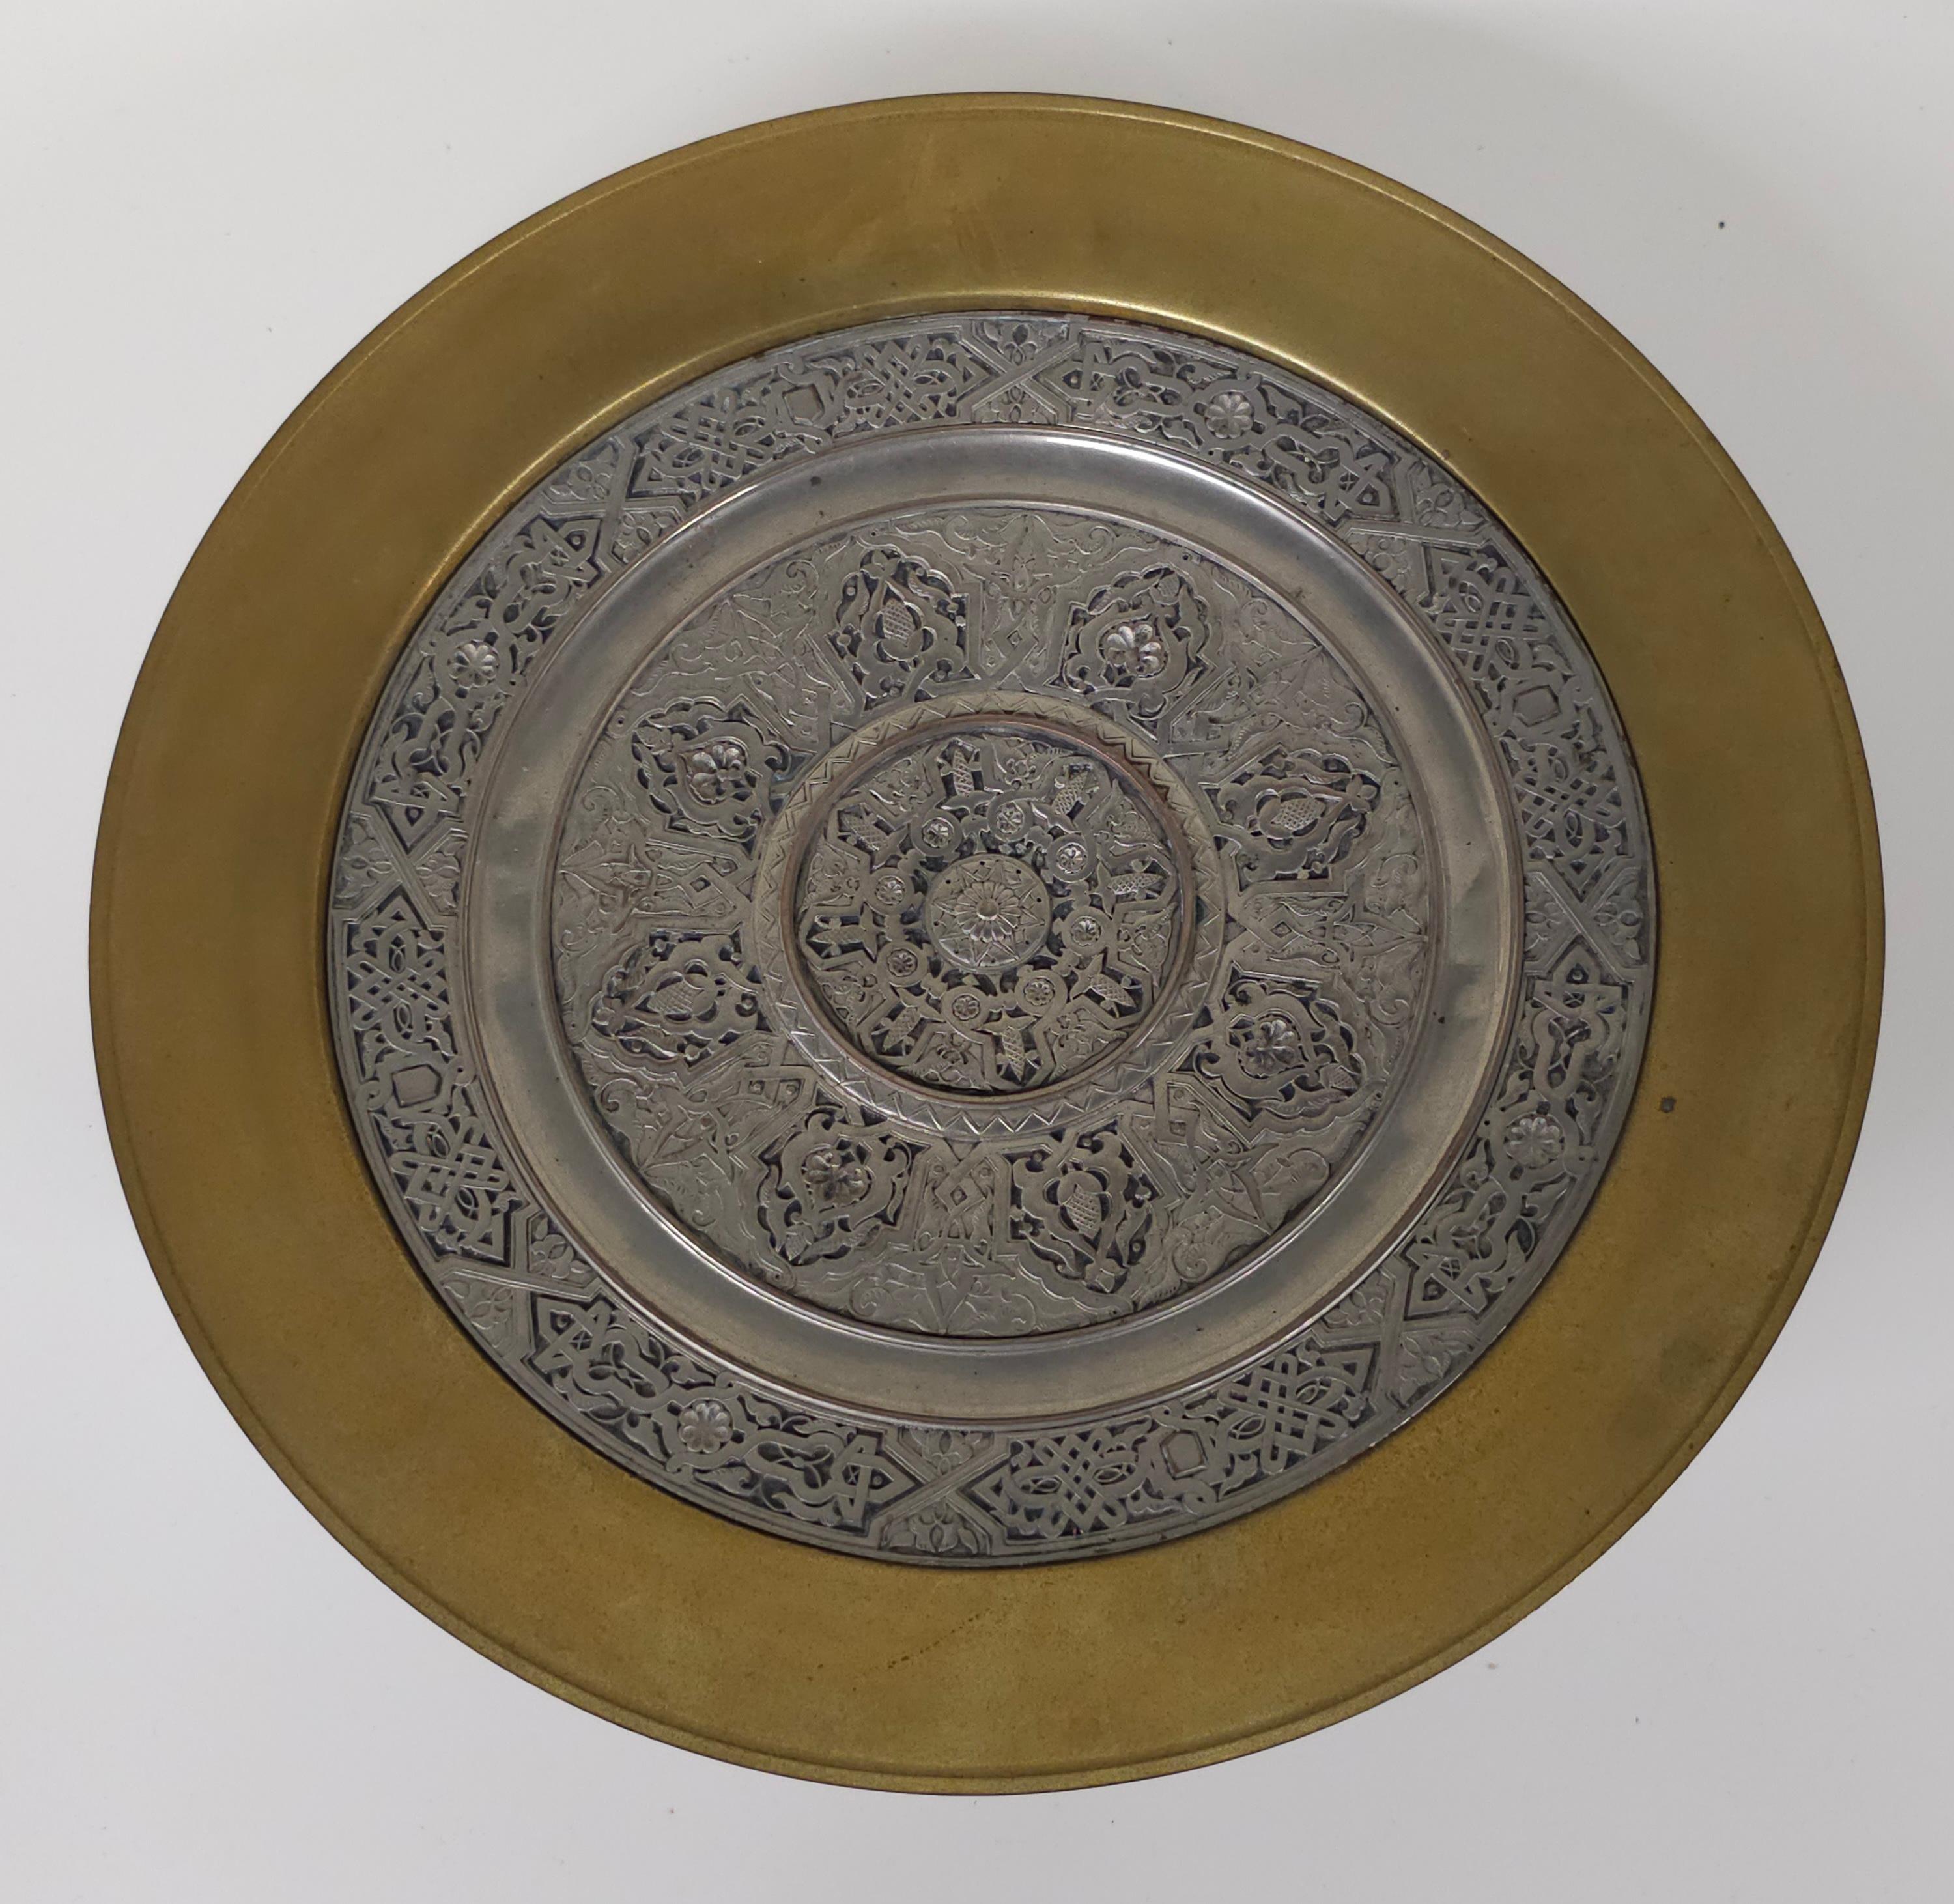 Large Early 20th Century Renaissance Style Brass Tazza. Measures 12 inches in diameter and stands 3.25